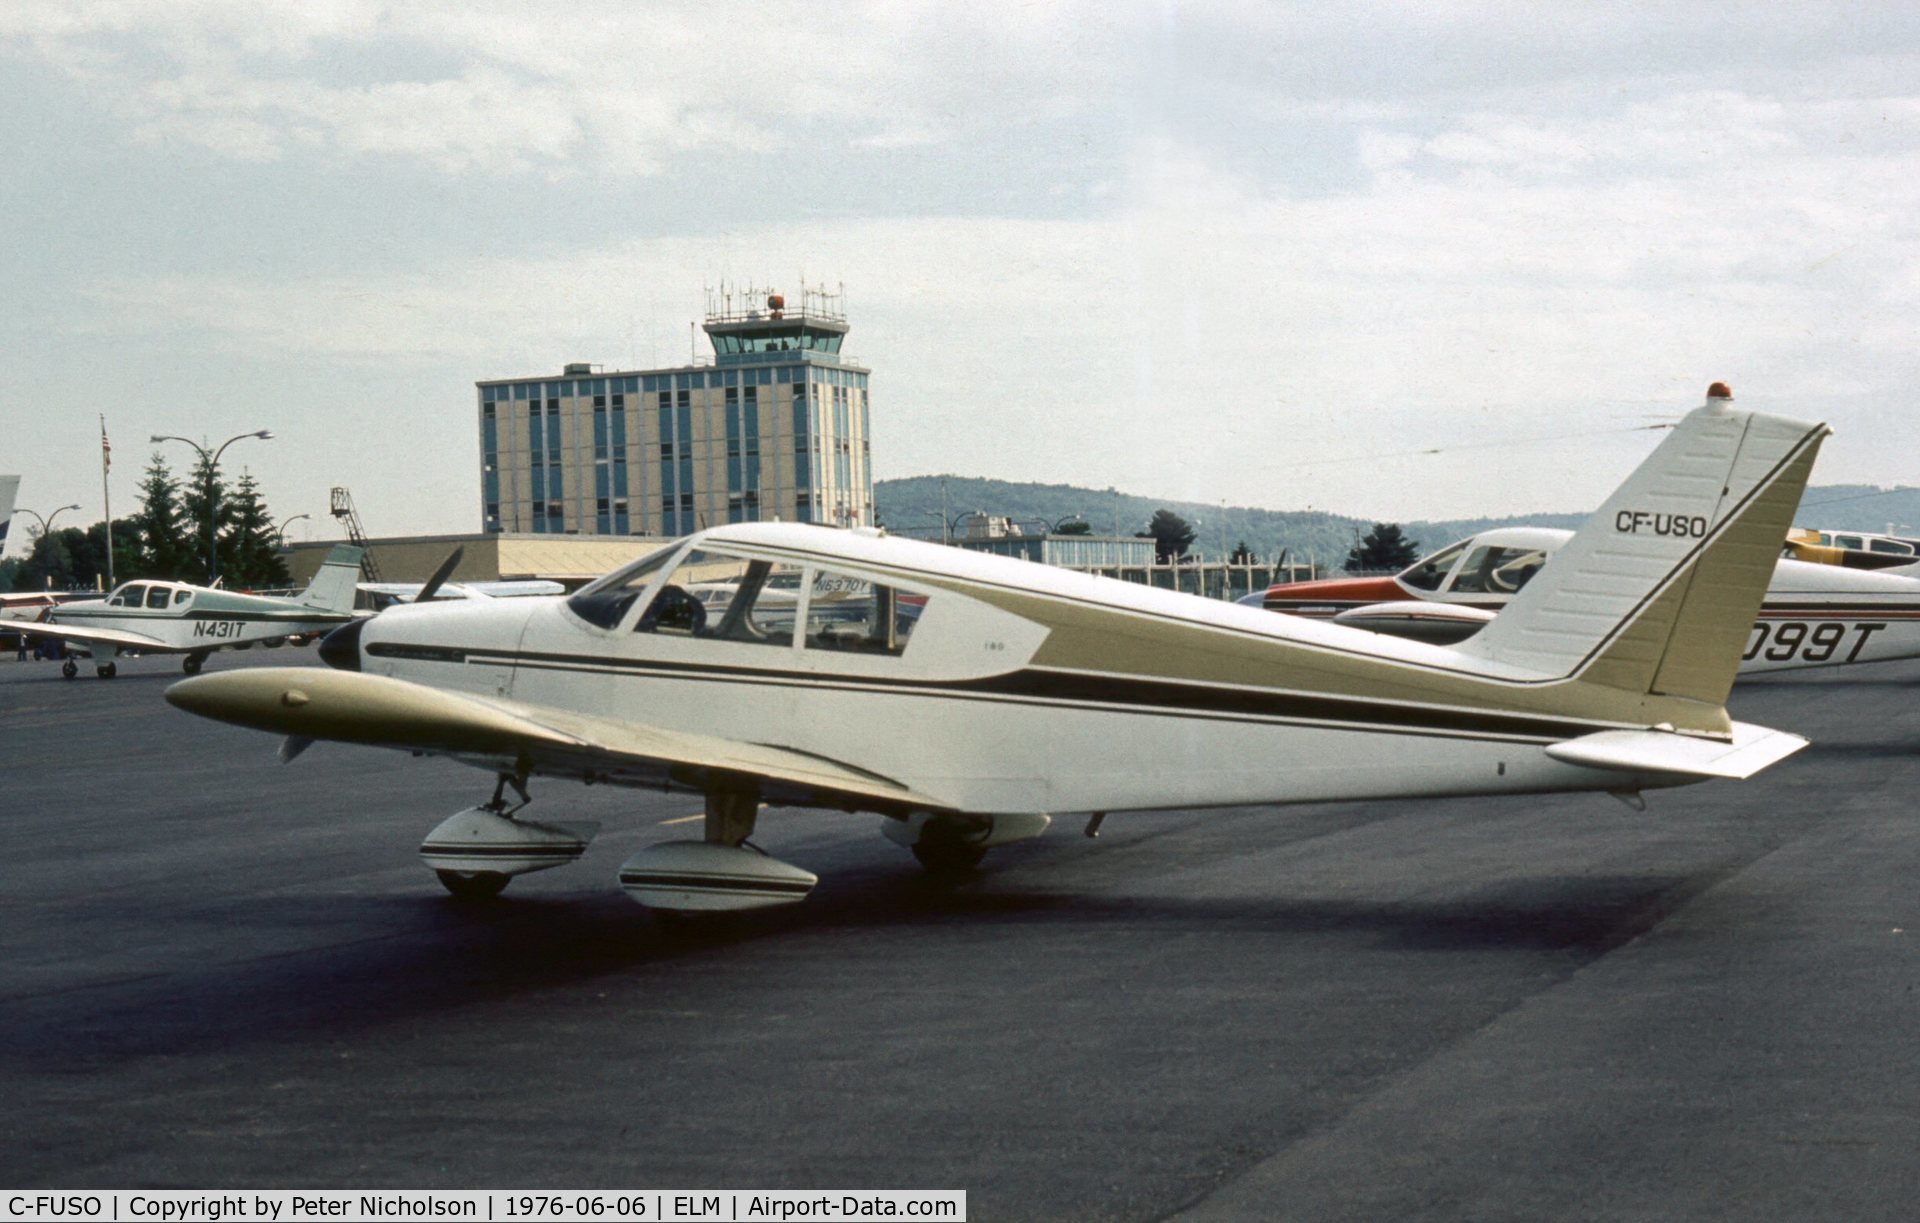 C-FUSO, 1965 Piper PA-28-180 C/N 28-3492, This is how it looked in 1976 when it visited Chemung County Airport, now known as Elmira Corning Regional.